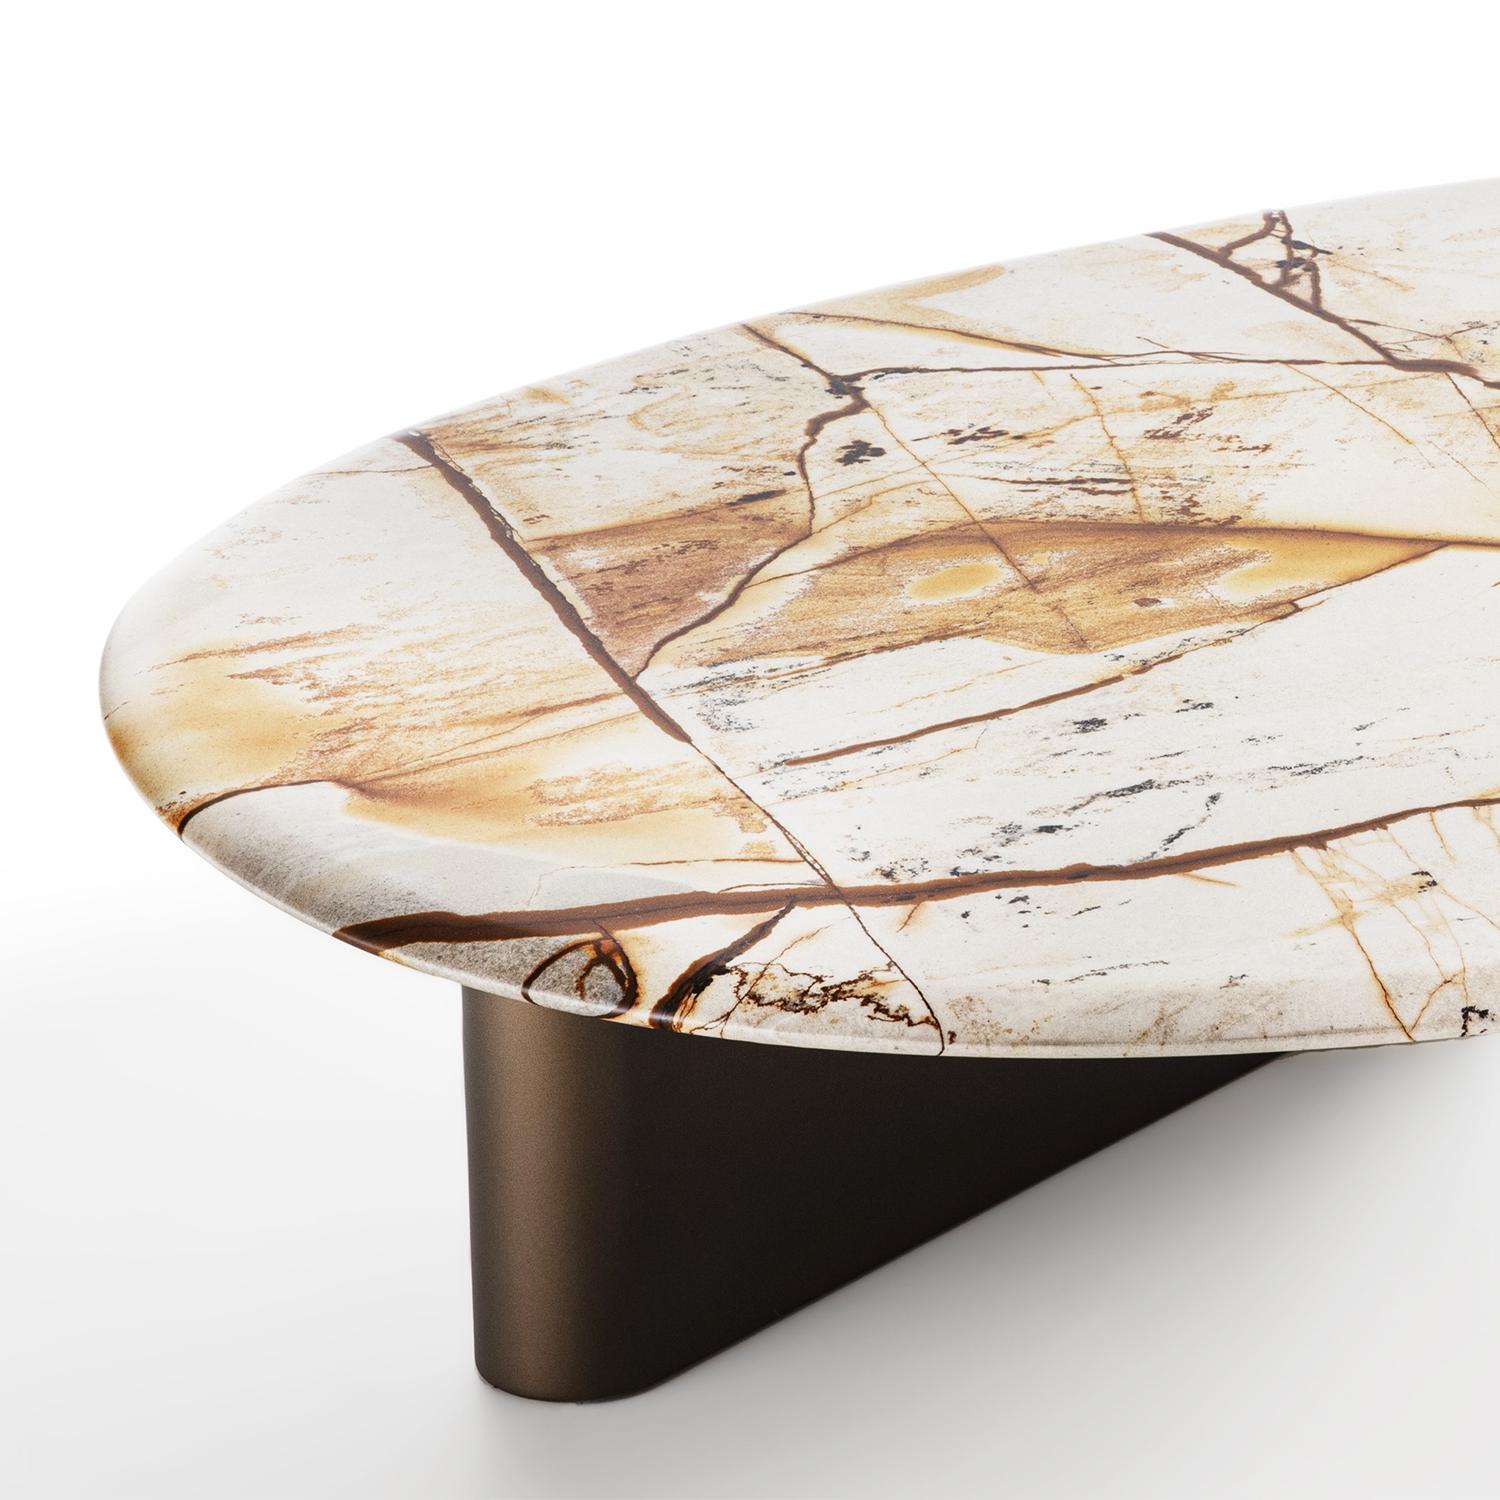 Coffee table Imperial Marble with imperial roma
polished marble top (each marble top is unique and diffferent
from each other) and with solid wood base in matt lacquered
bronzed finish.